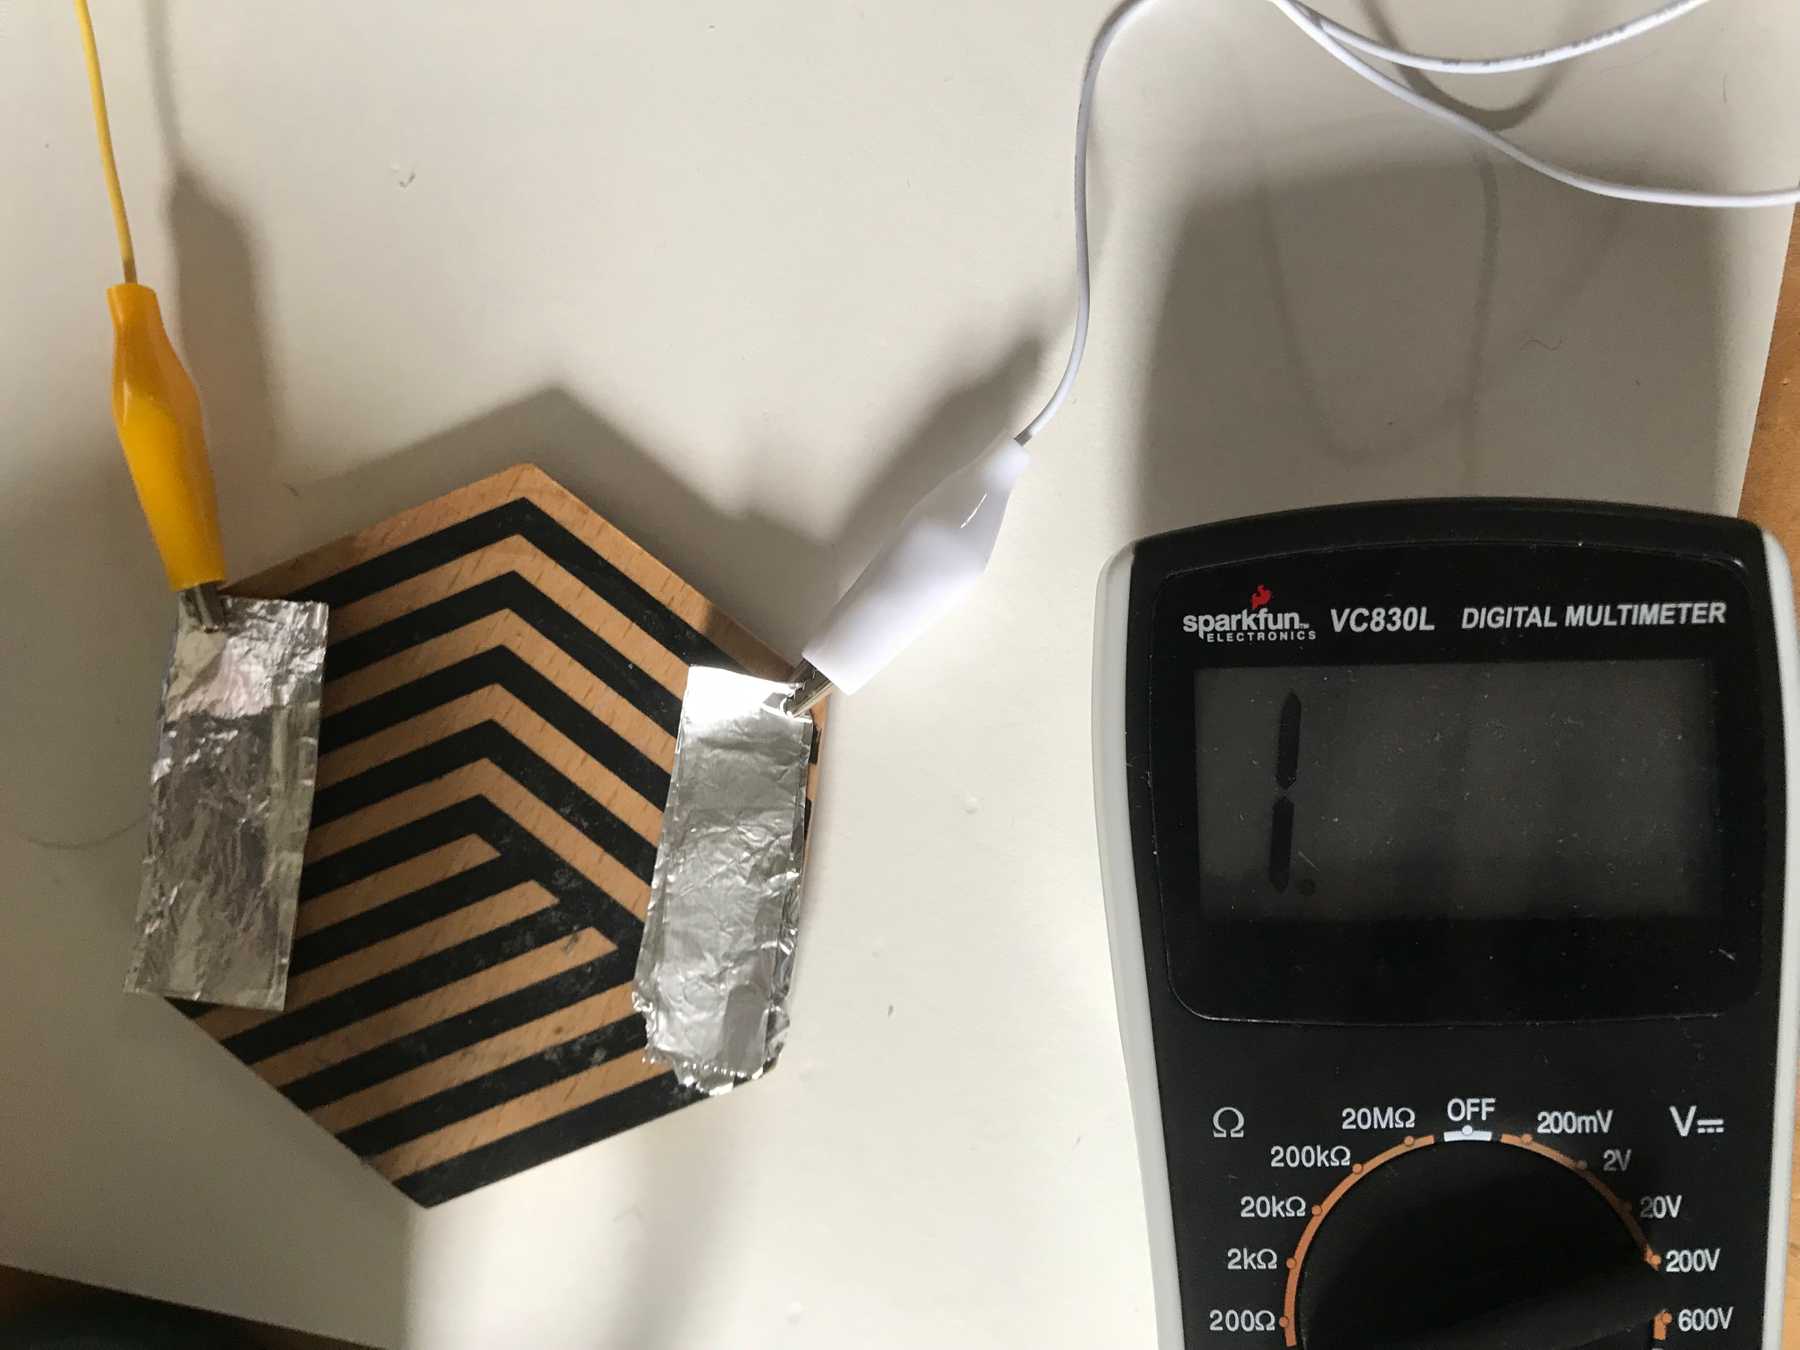 Measuring no continuity on the empty coaster